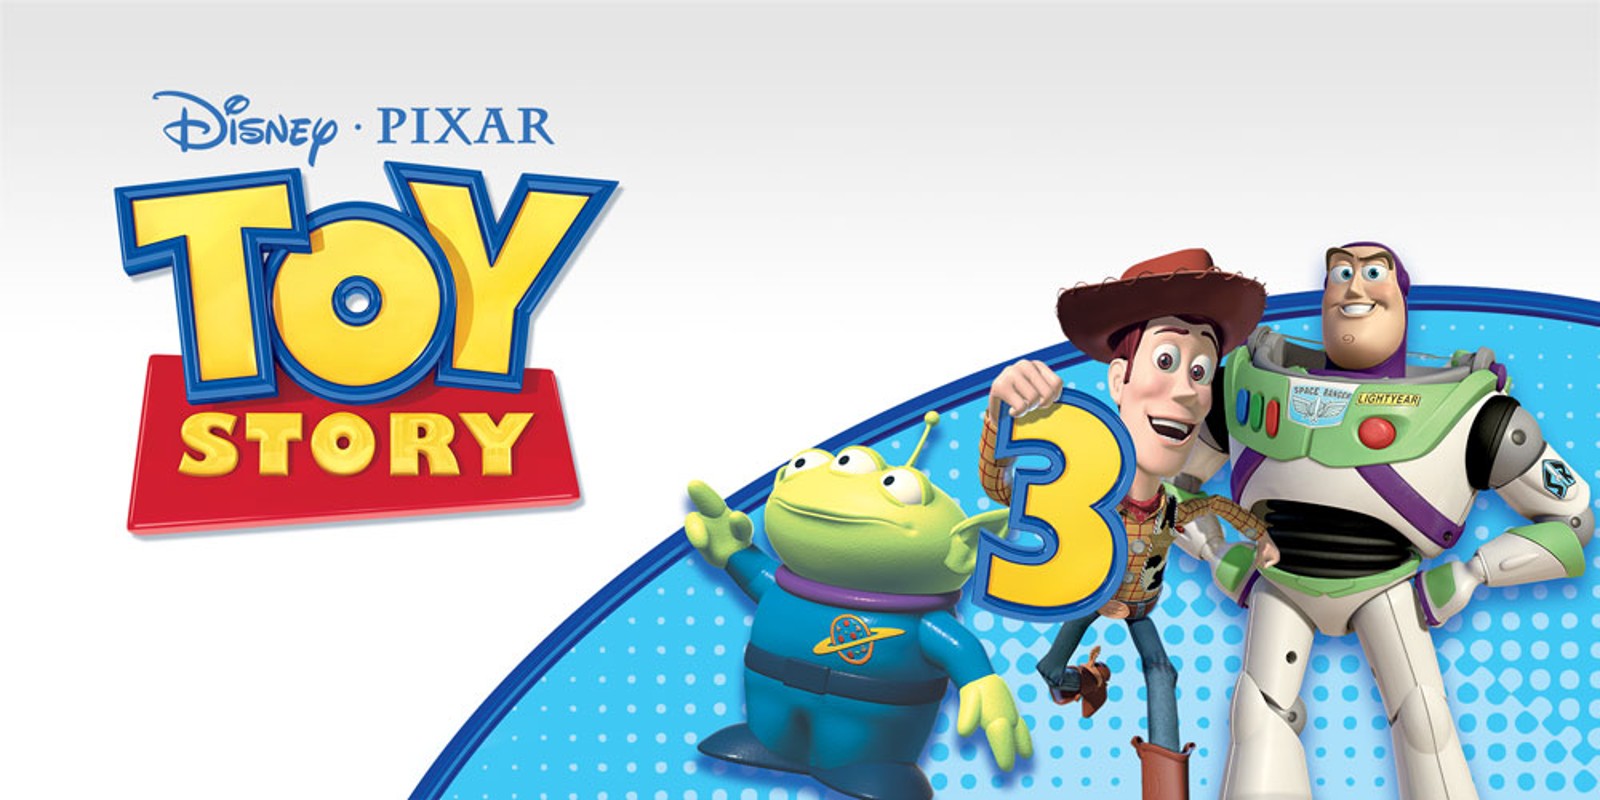 toy story 3 the video game wii